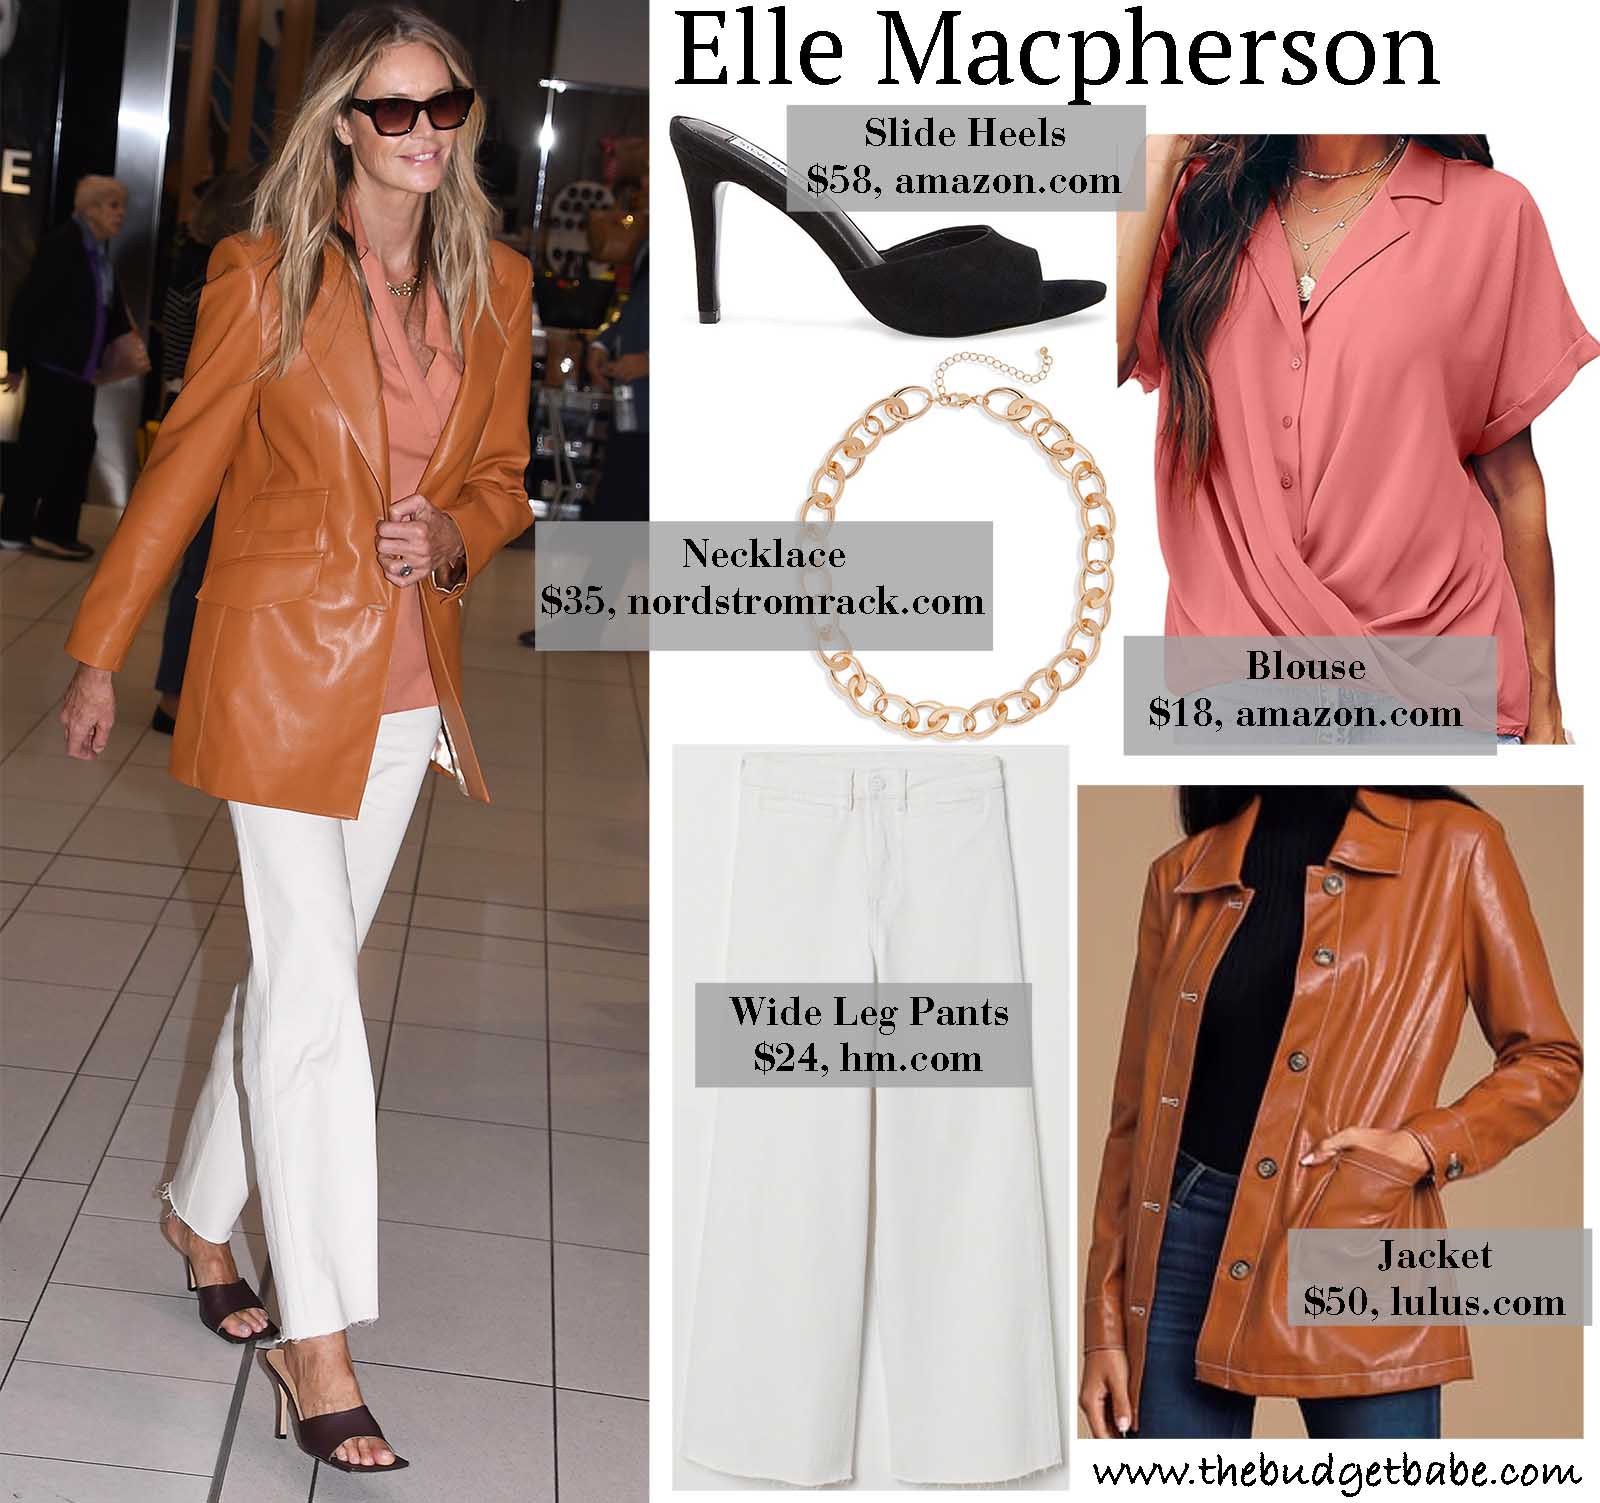 Elle Macpherson is serving serious style in her brown leather jacket and wide leg pants!